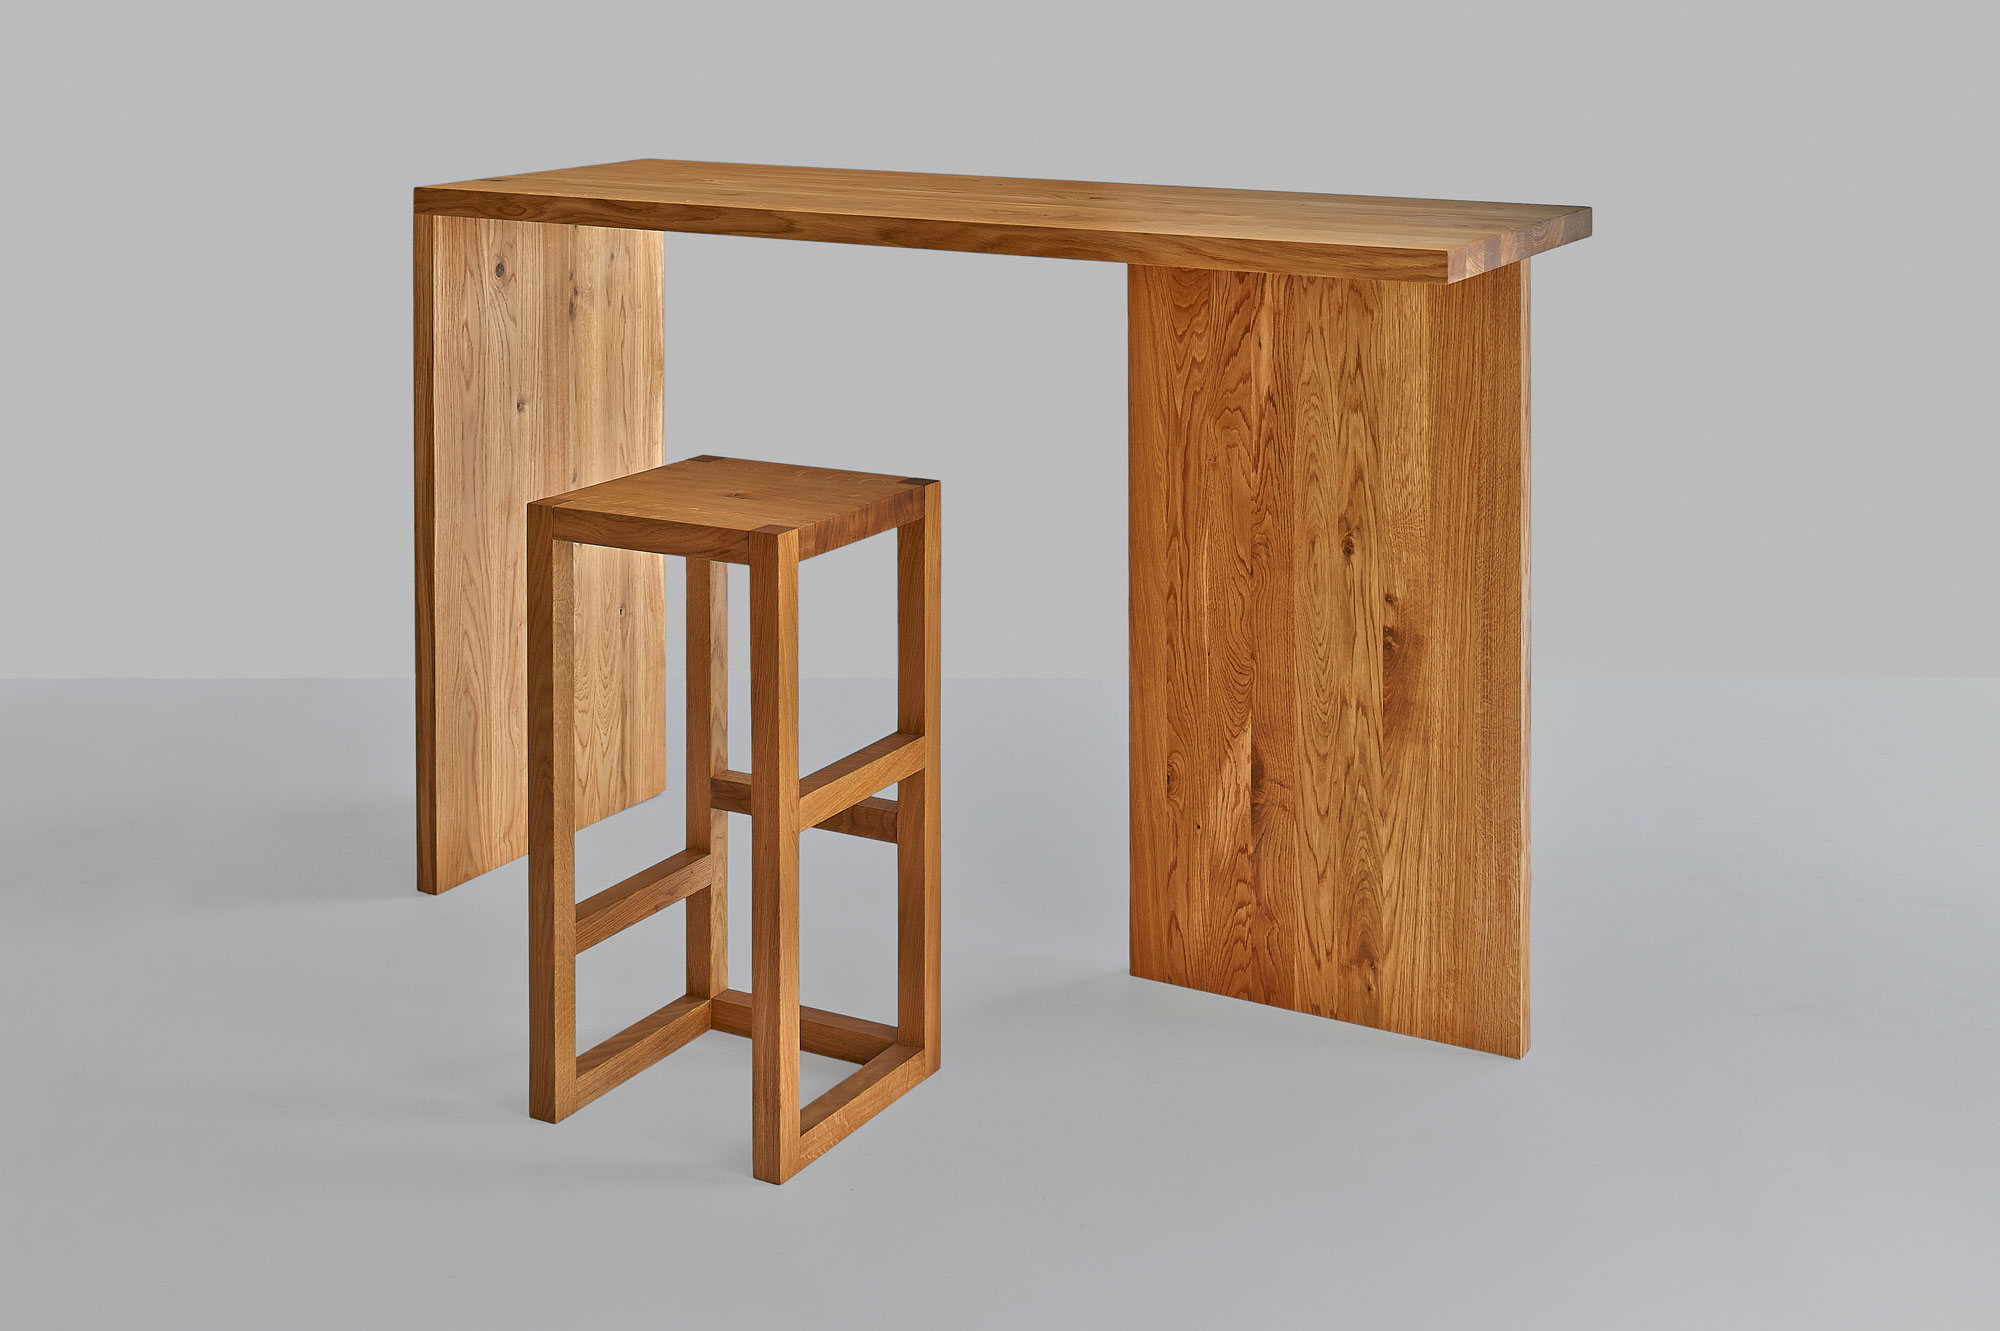 Solid Wood Console Table MENA CONSOLE 1468 custom made in solid wood by vitamin design